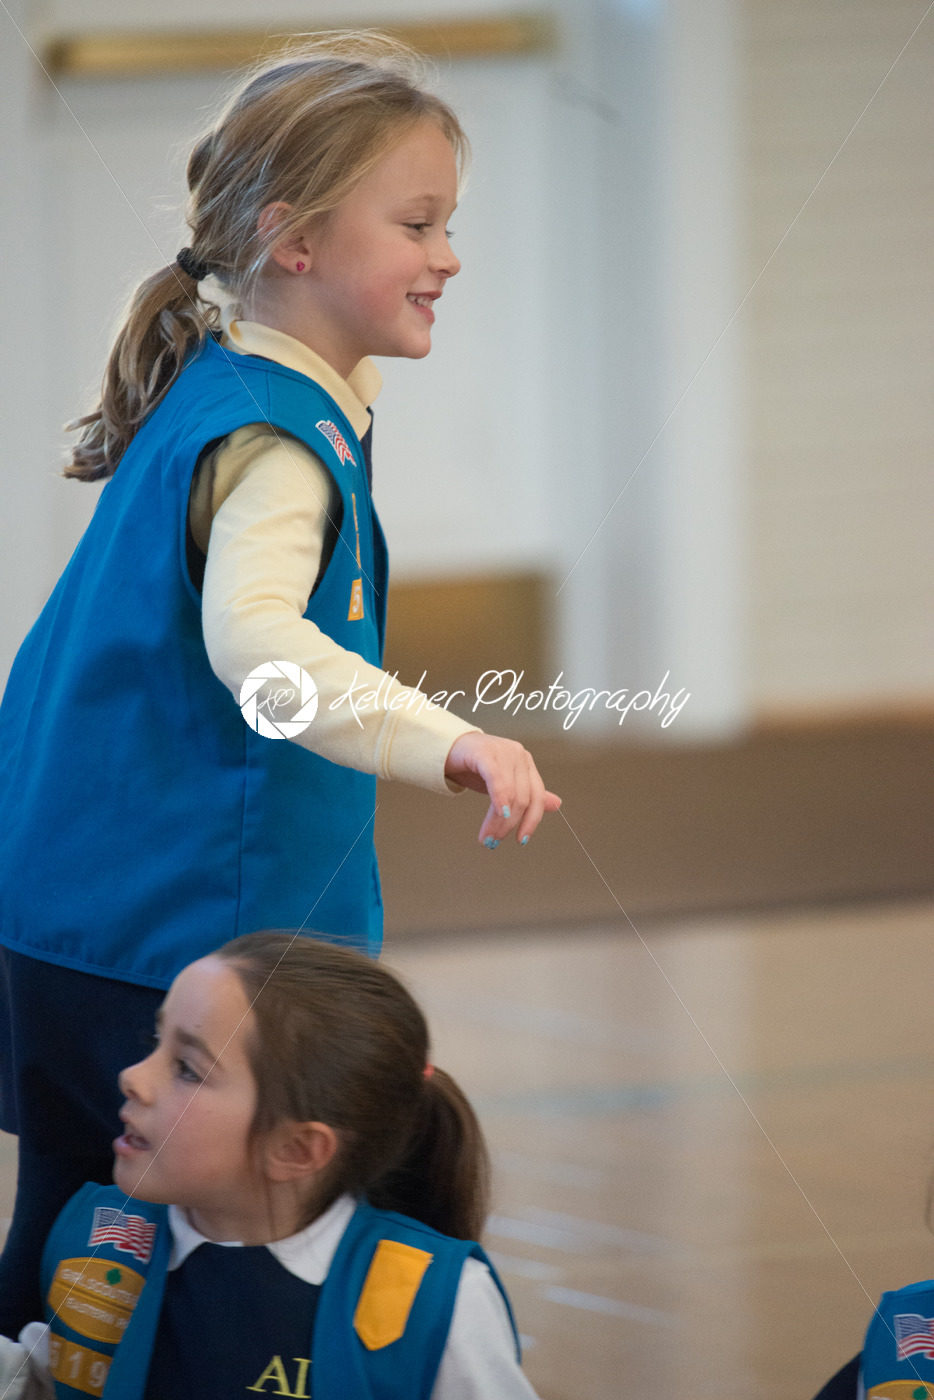 ROSEMONT, PA – OCTOBER 19: Agnes Irwin Daisy Scout Troop 5198 Investiture Ceremony on October 19, 2015 - Kelleher Photography Store